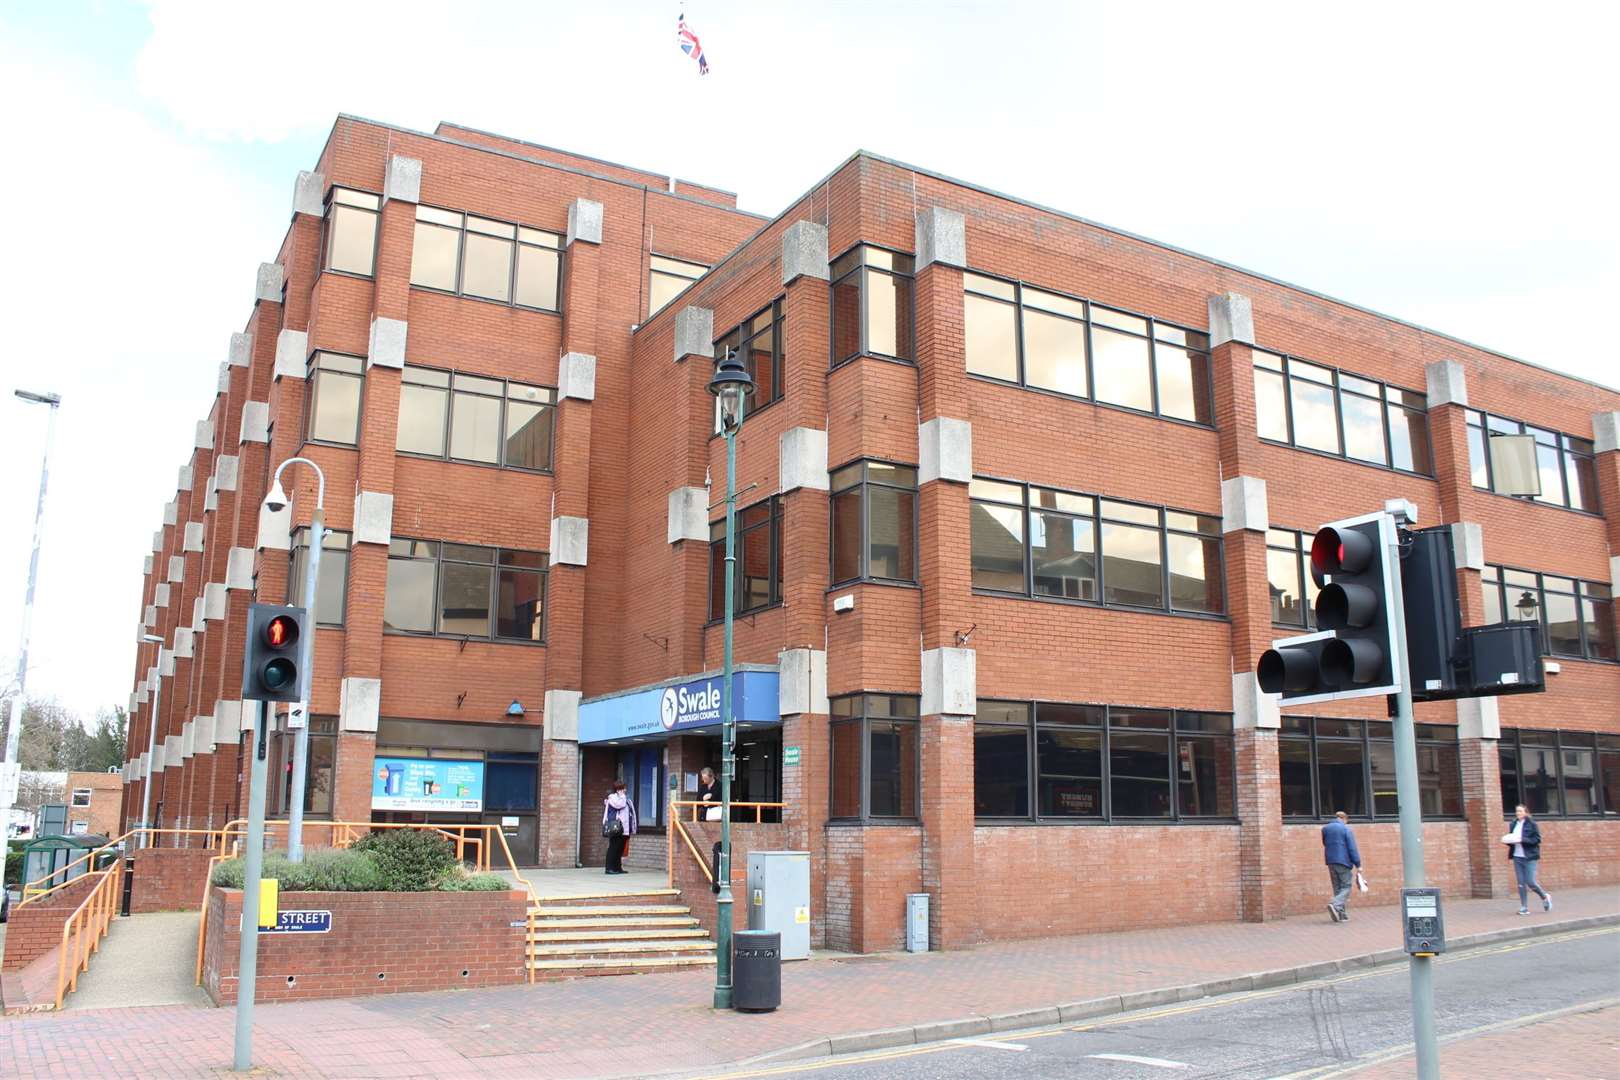 The council's offices at Swale House, Sittingbourne